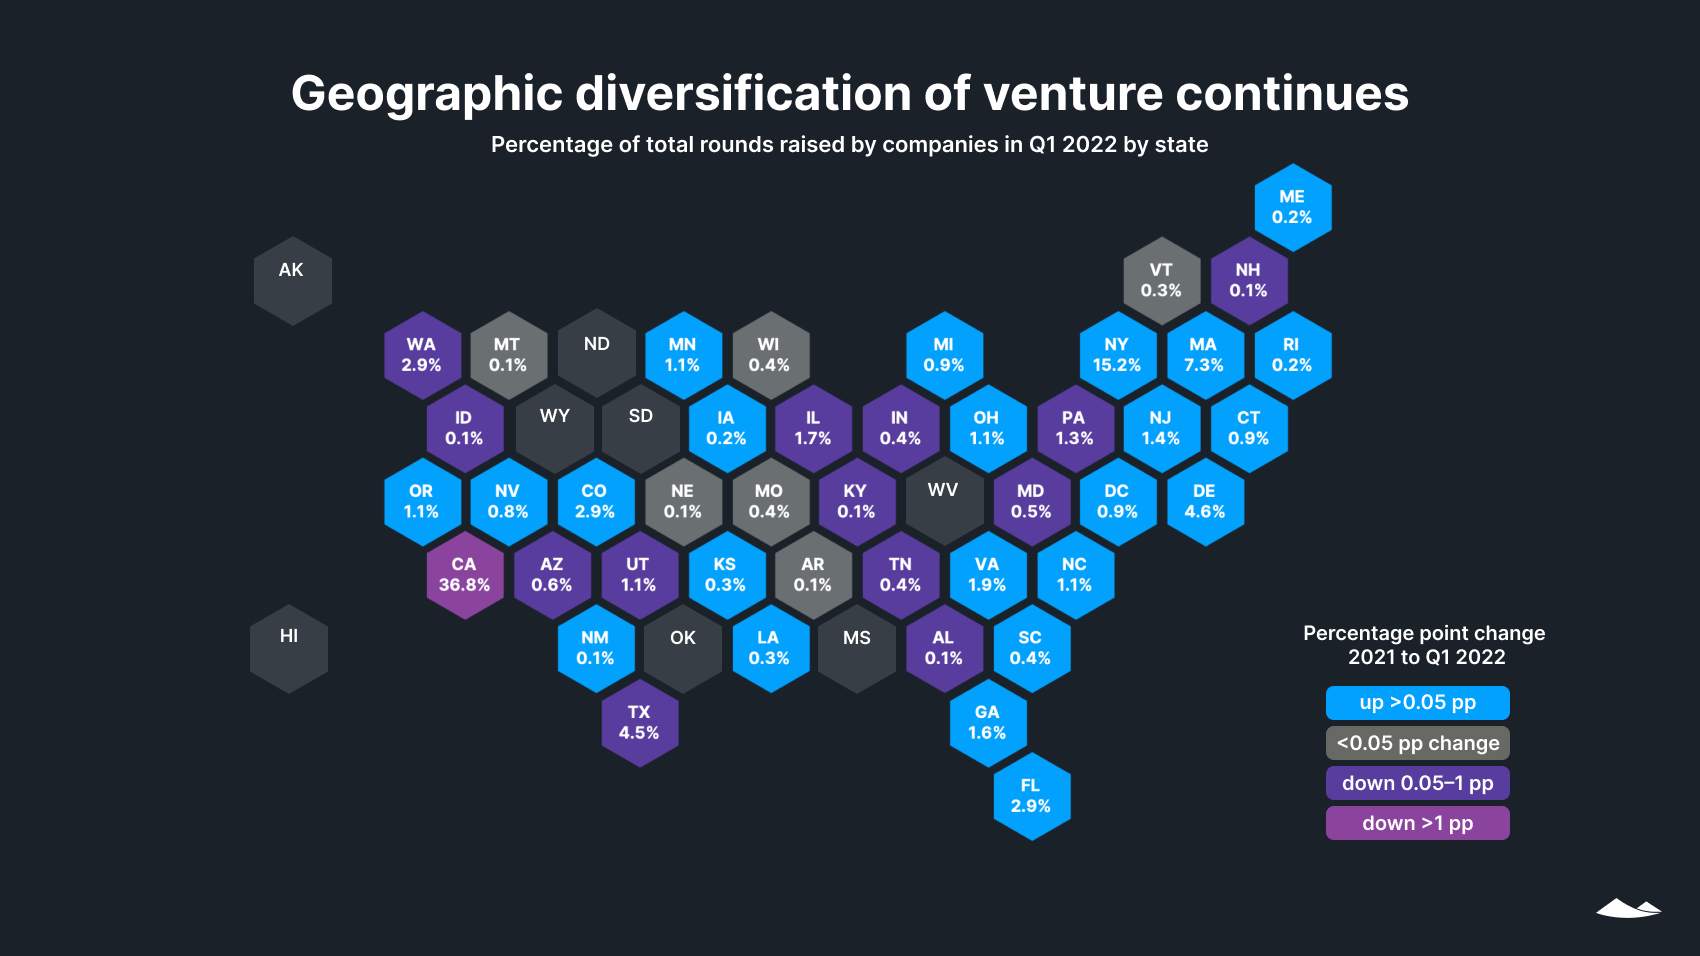 Geographic diversification of venture continues